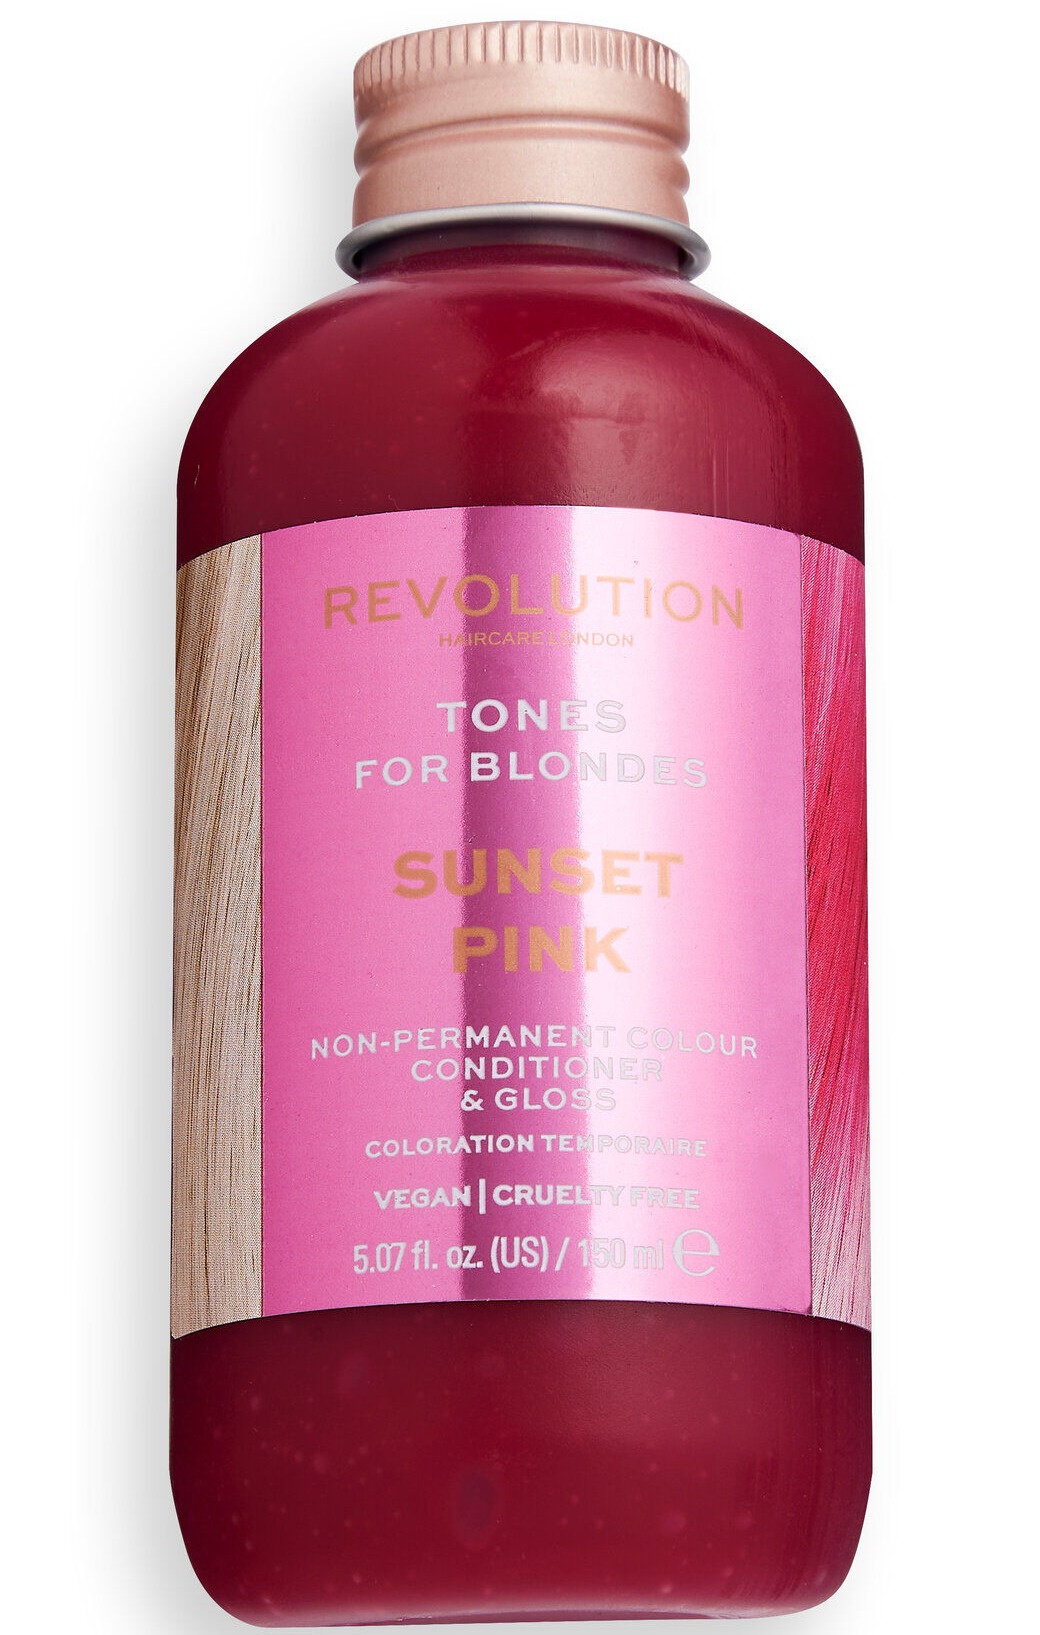 Revolution Haircare Tones For Blondes Sunset Pink